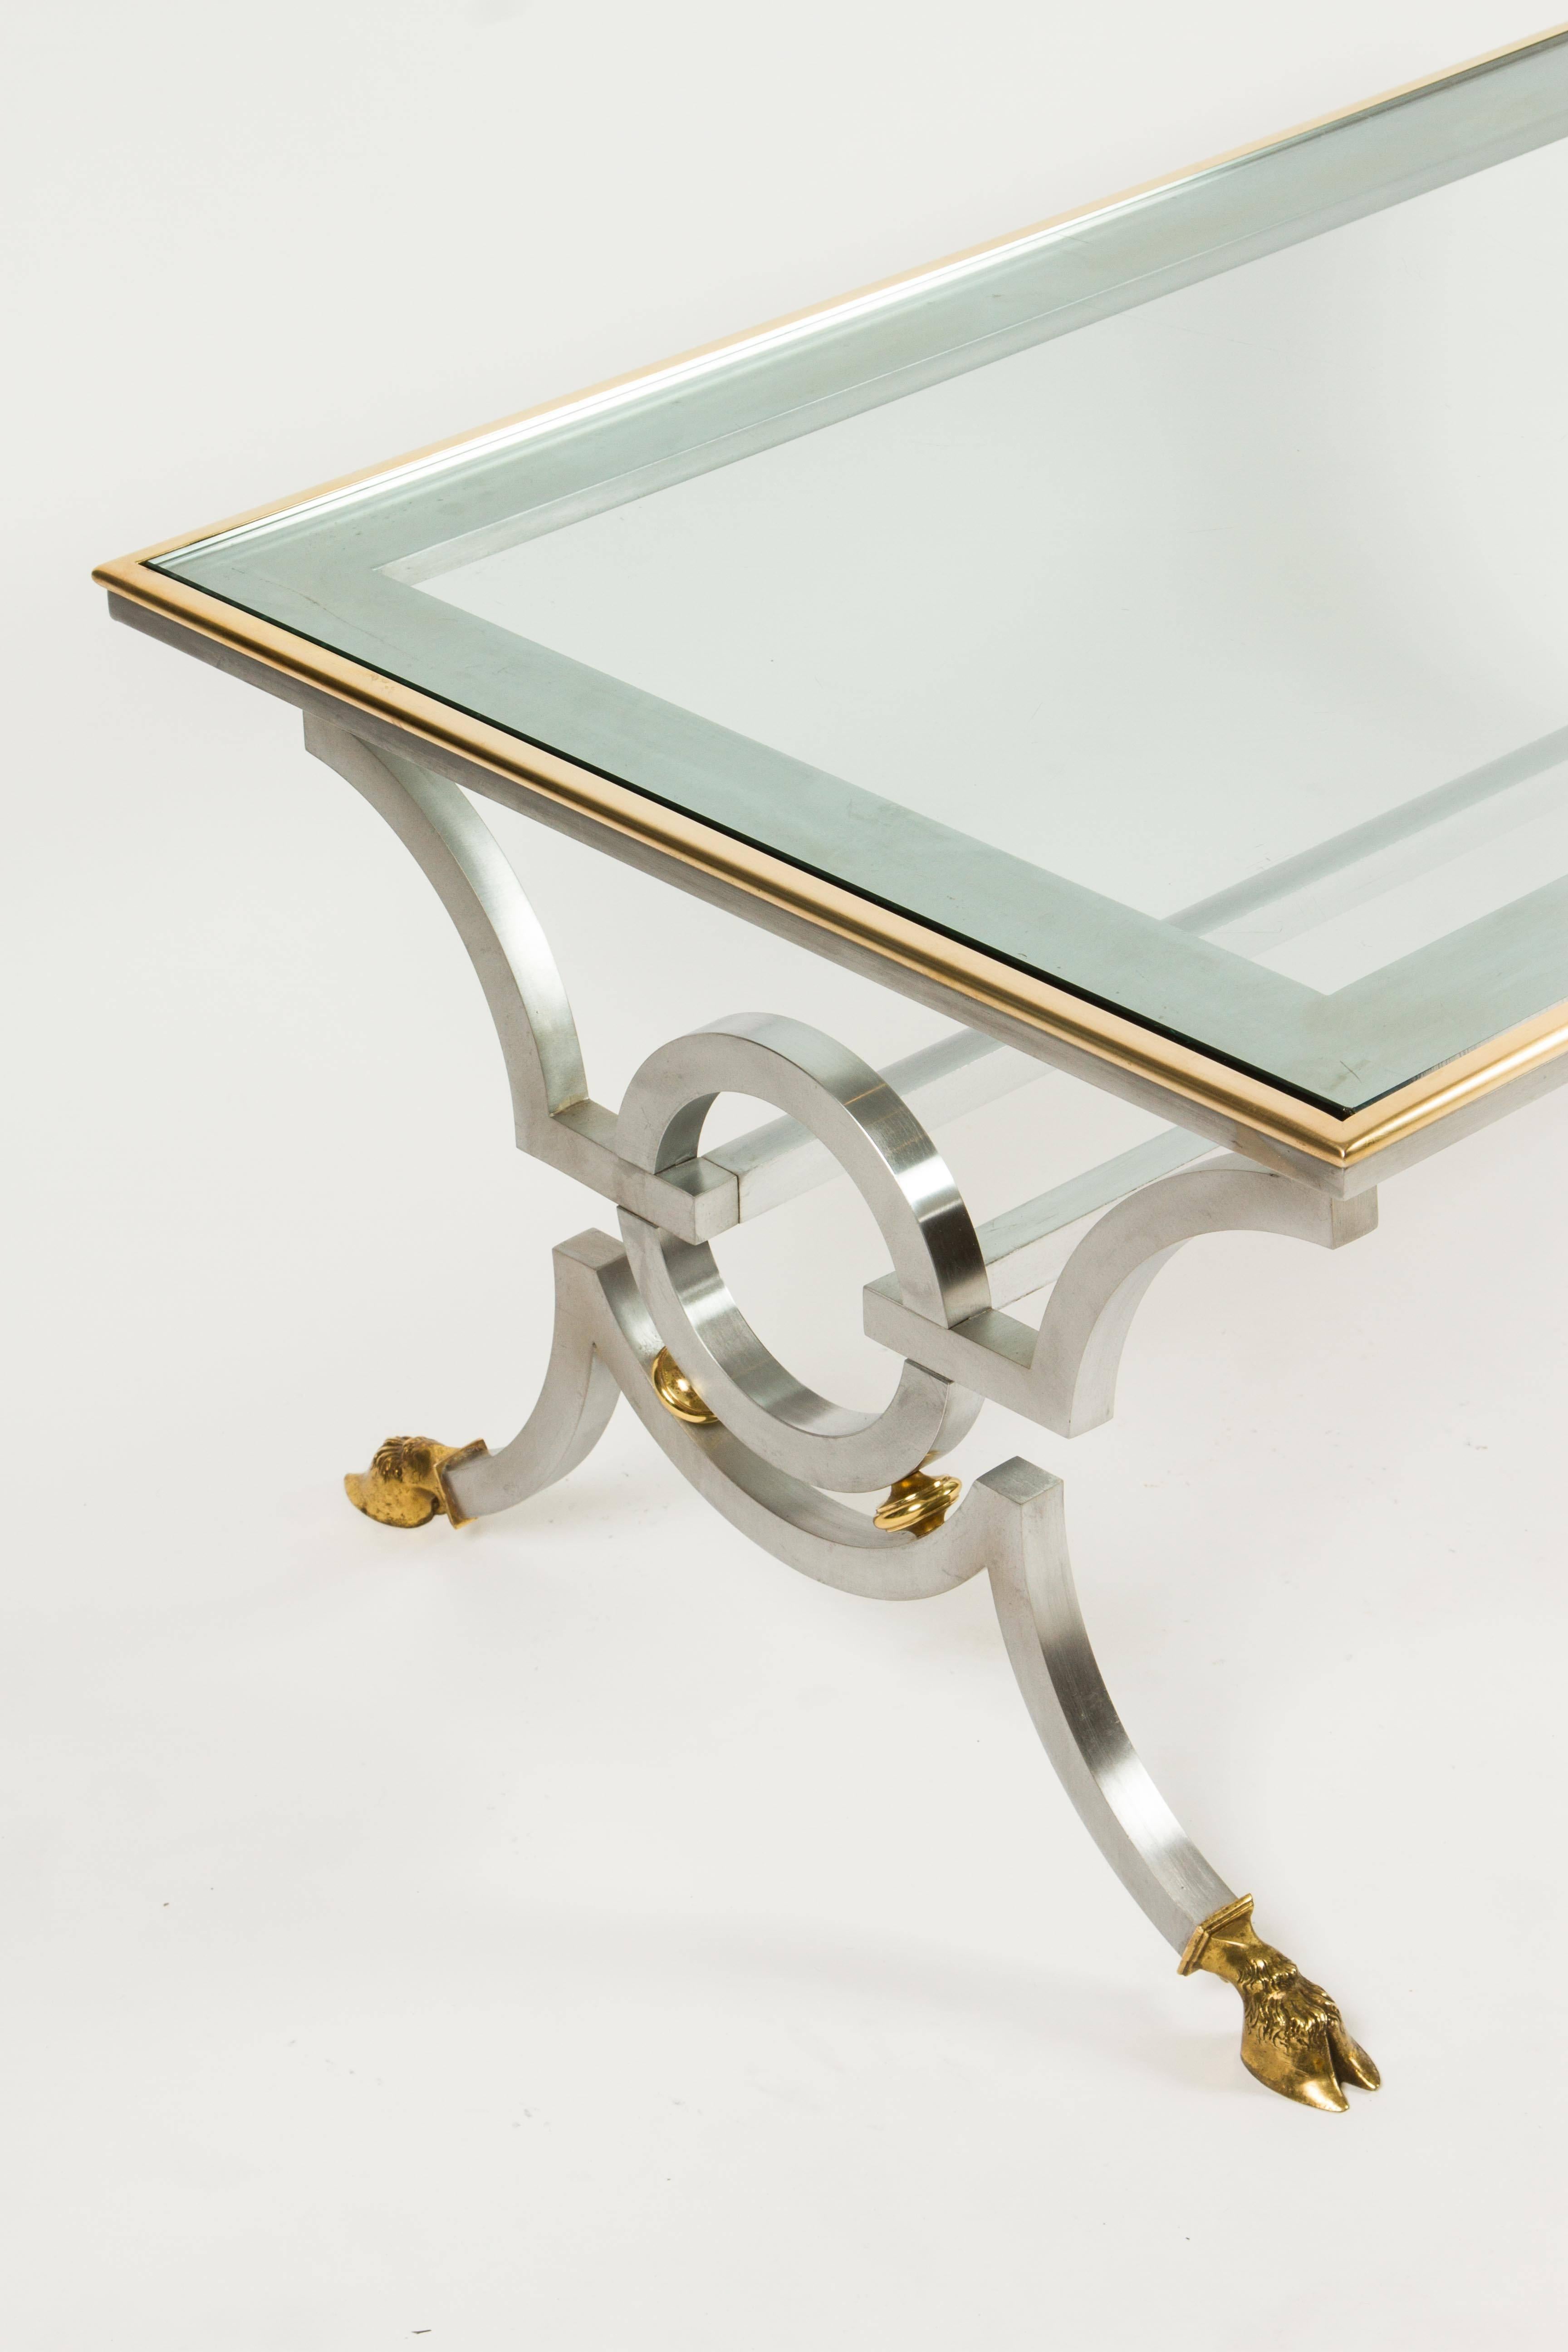 Hollywood Regency Chic Steel, Brass and Glass Cocktail Table